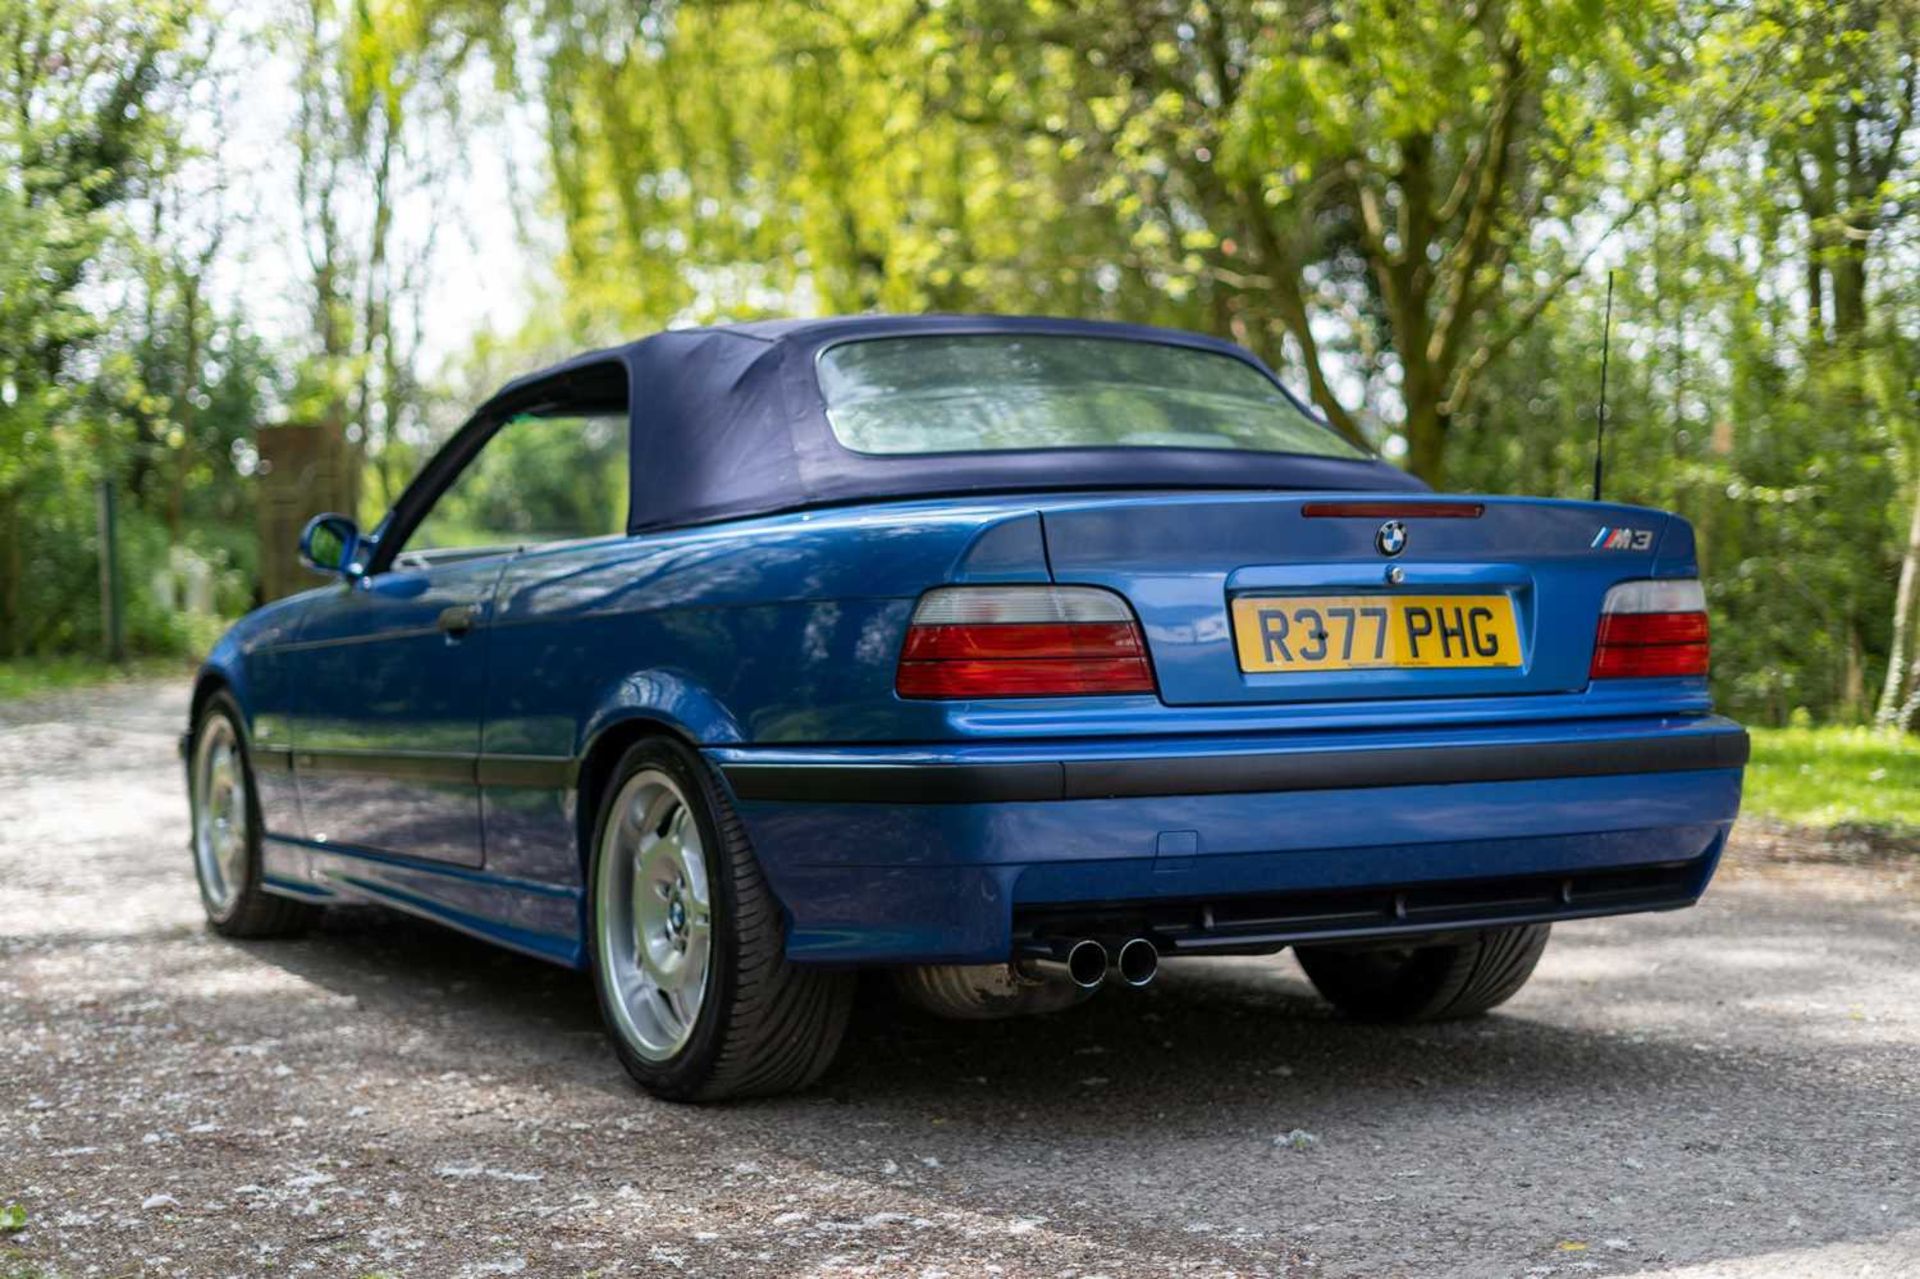 1998 BMW M3 Evolution Convertible Only 54,000 miles and full service history - Image 86 of 89